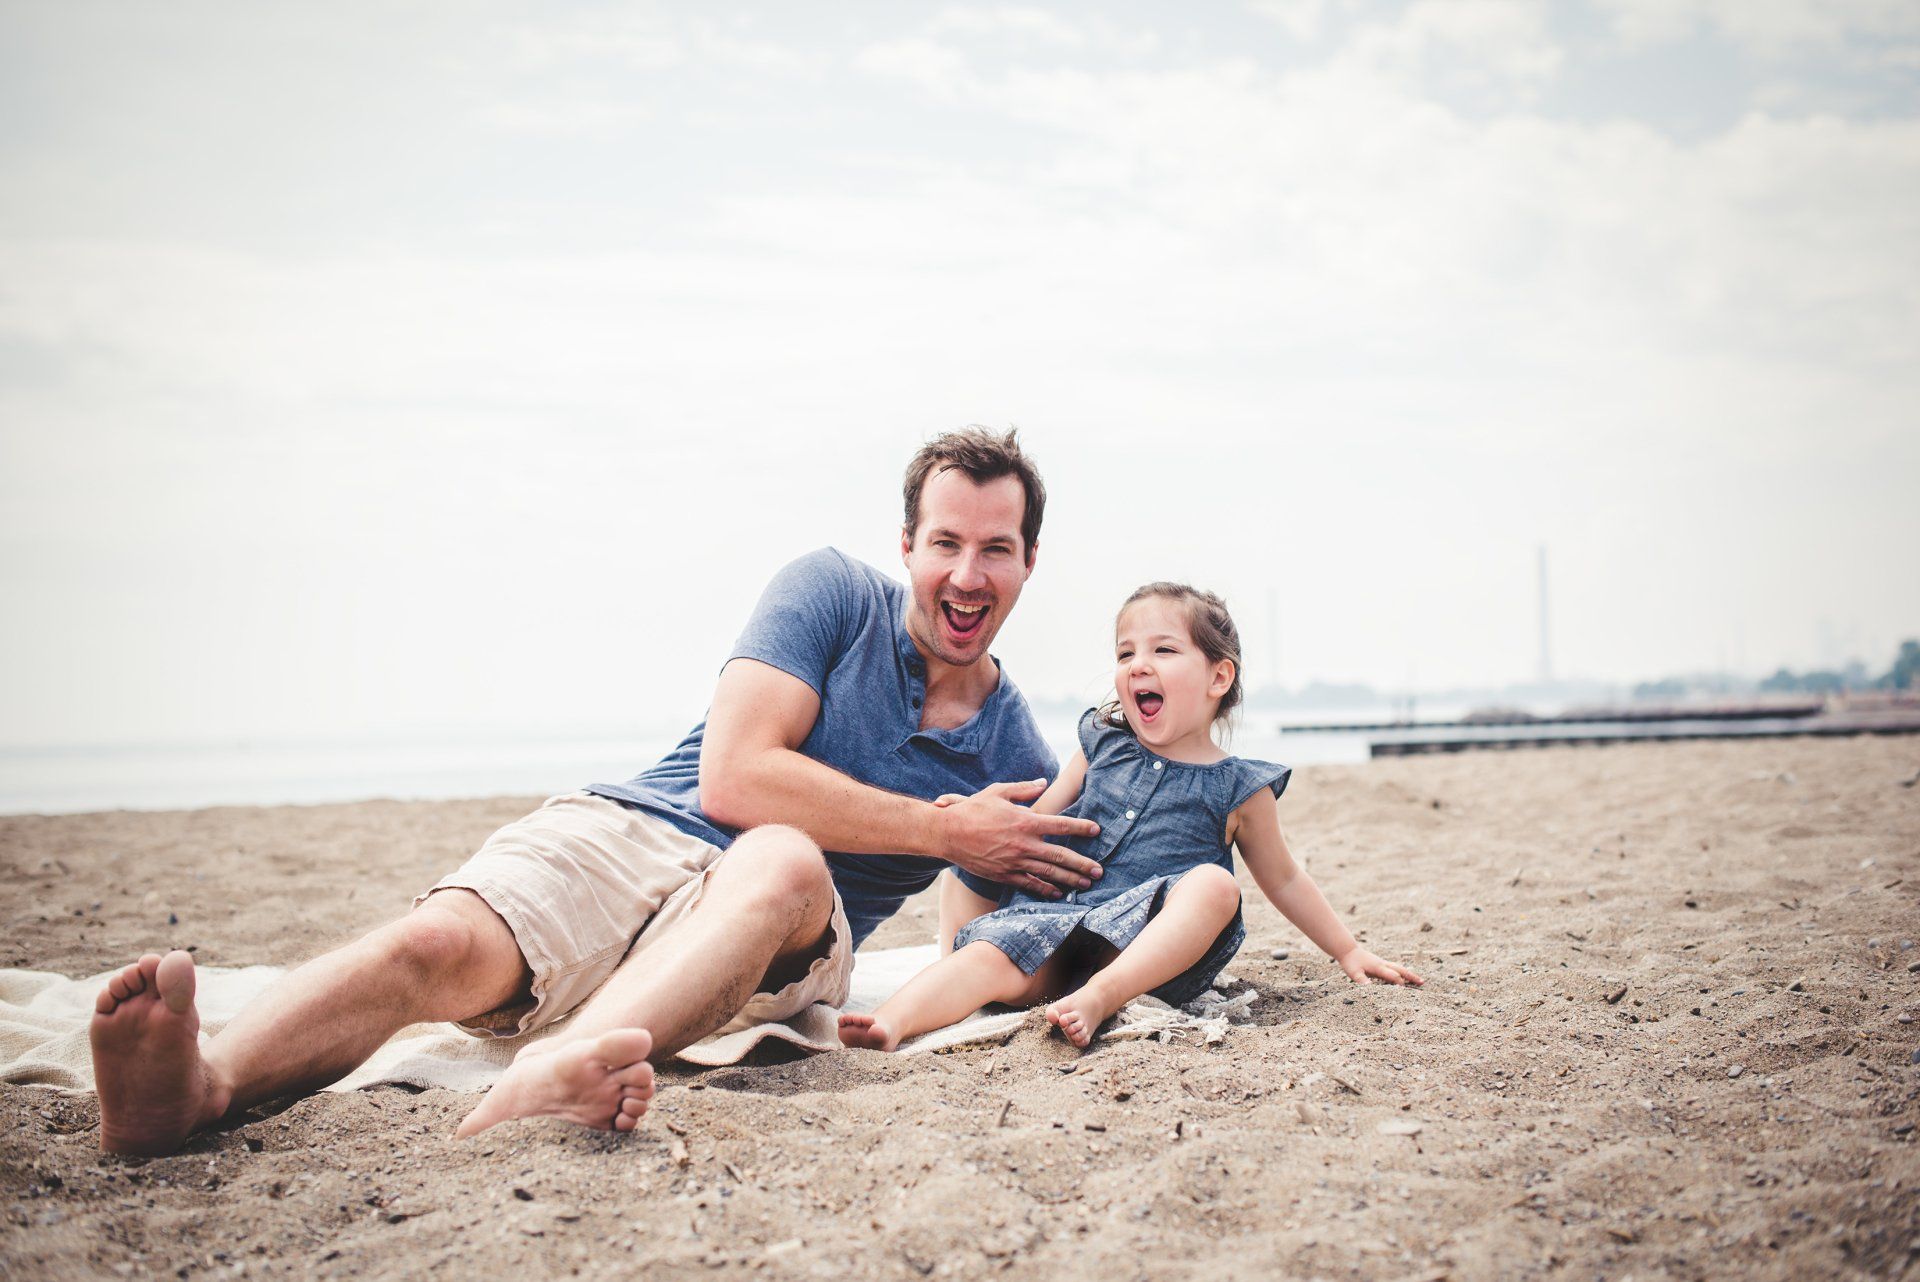 Family photographer Toronto | Stacey Naglie | Man and girl laughing on the beach